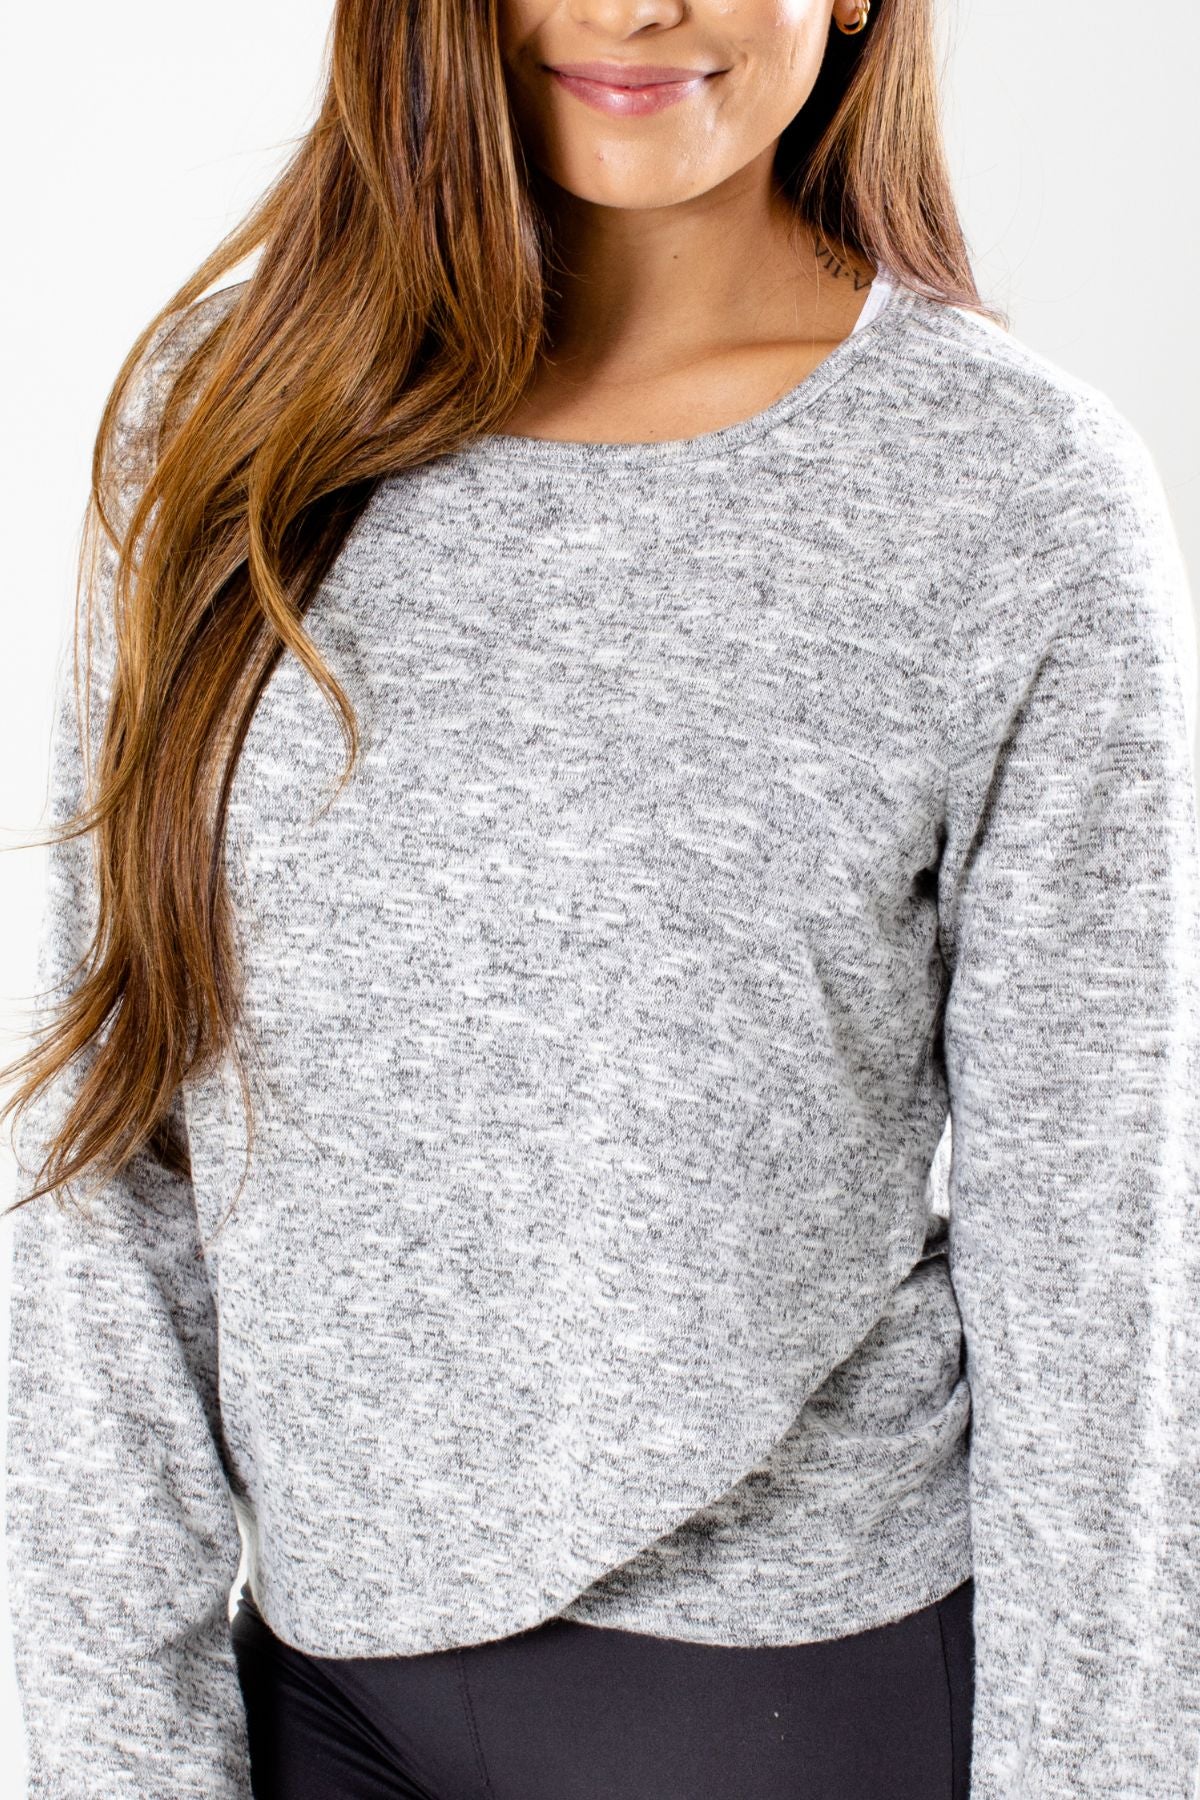 Heather Gray Cute and Comfortable Boutique Activewear Tops for Women